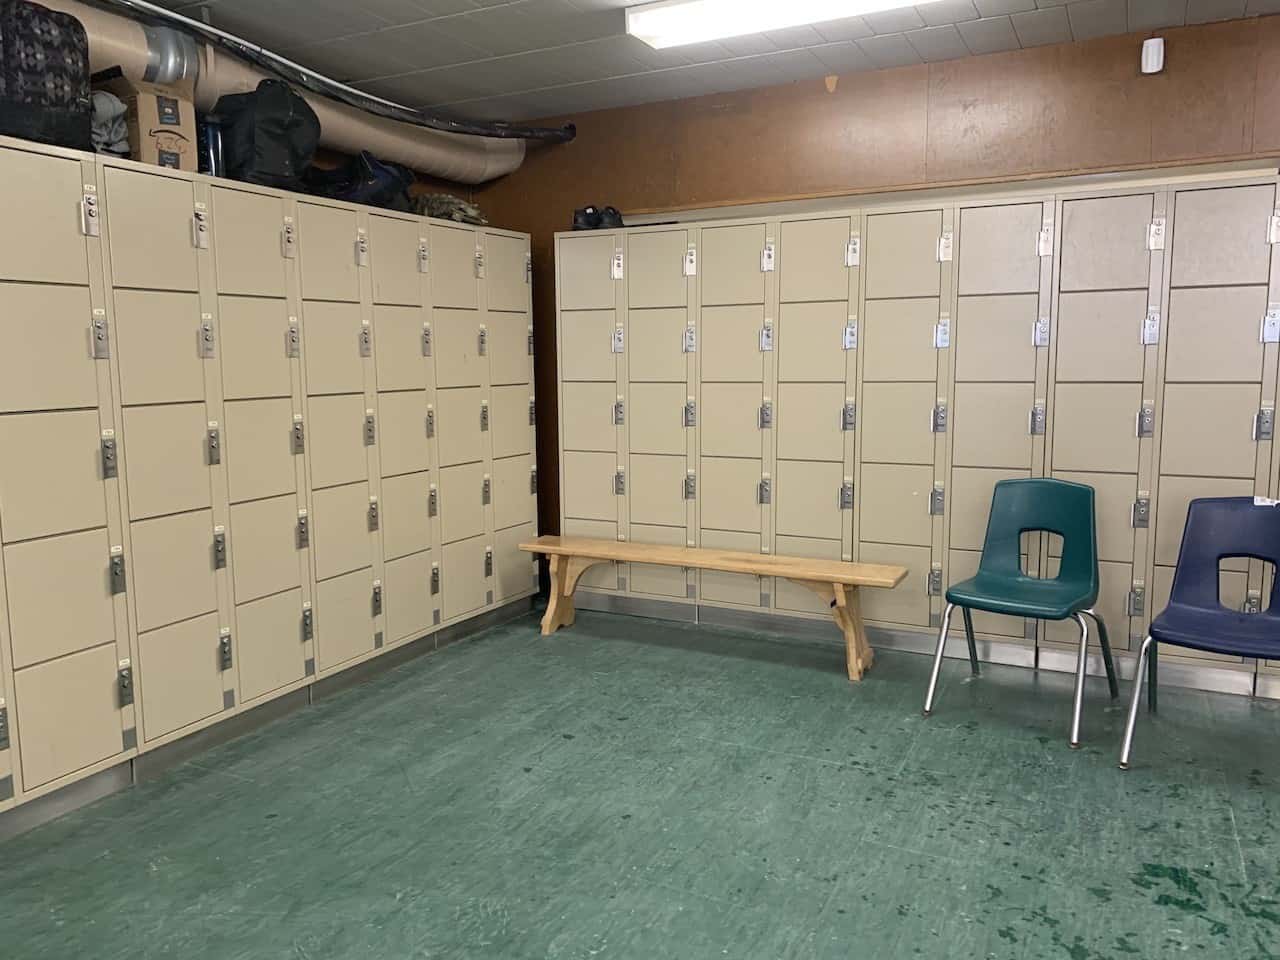 Locker Area at Mount St. Louis Coldwater Ontario Canada - Mount St. Louis offered benches, chairs and lockers for guests. There was also a fantastic area for changing in and out of gear and eating food that had been brought from home.